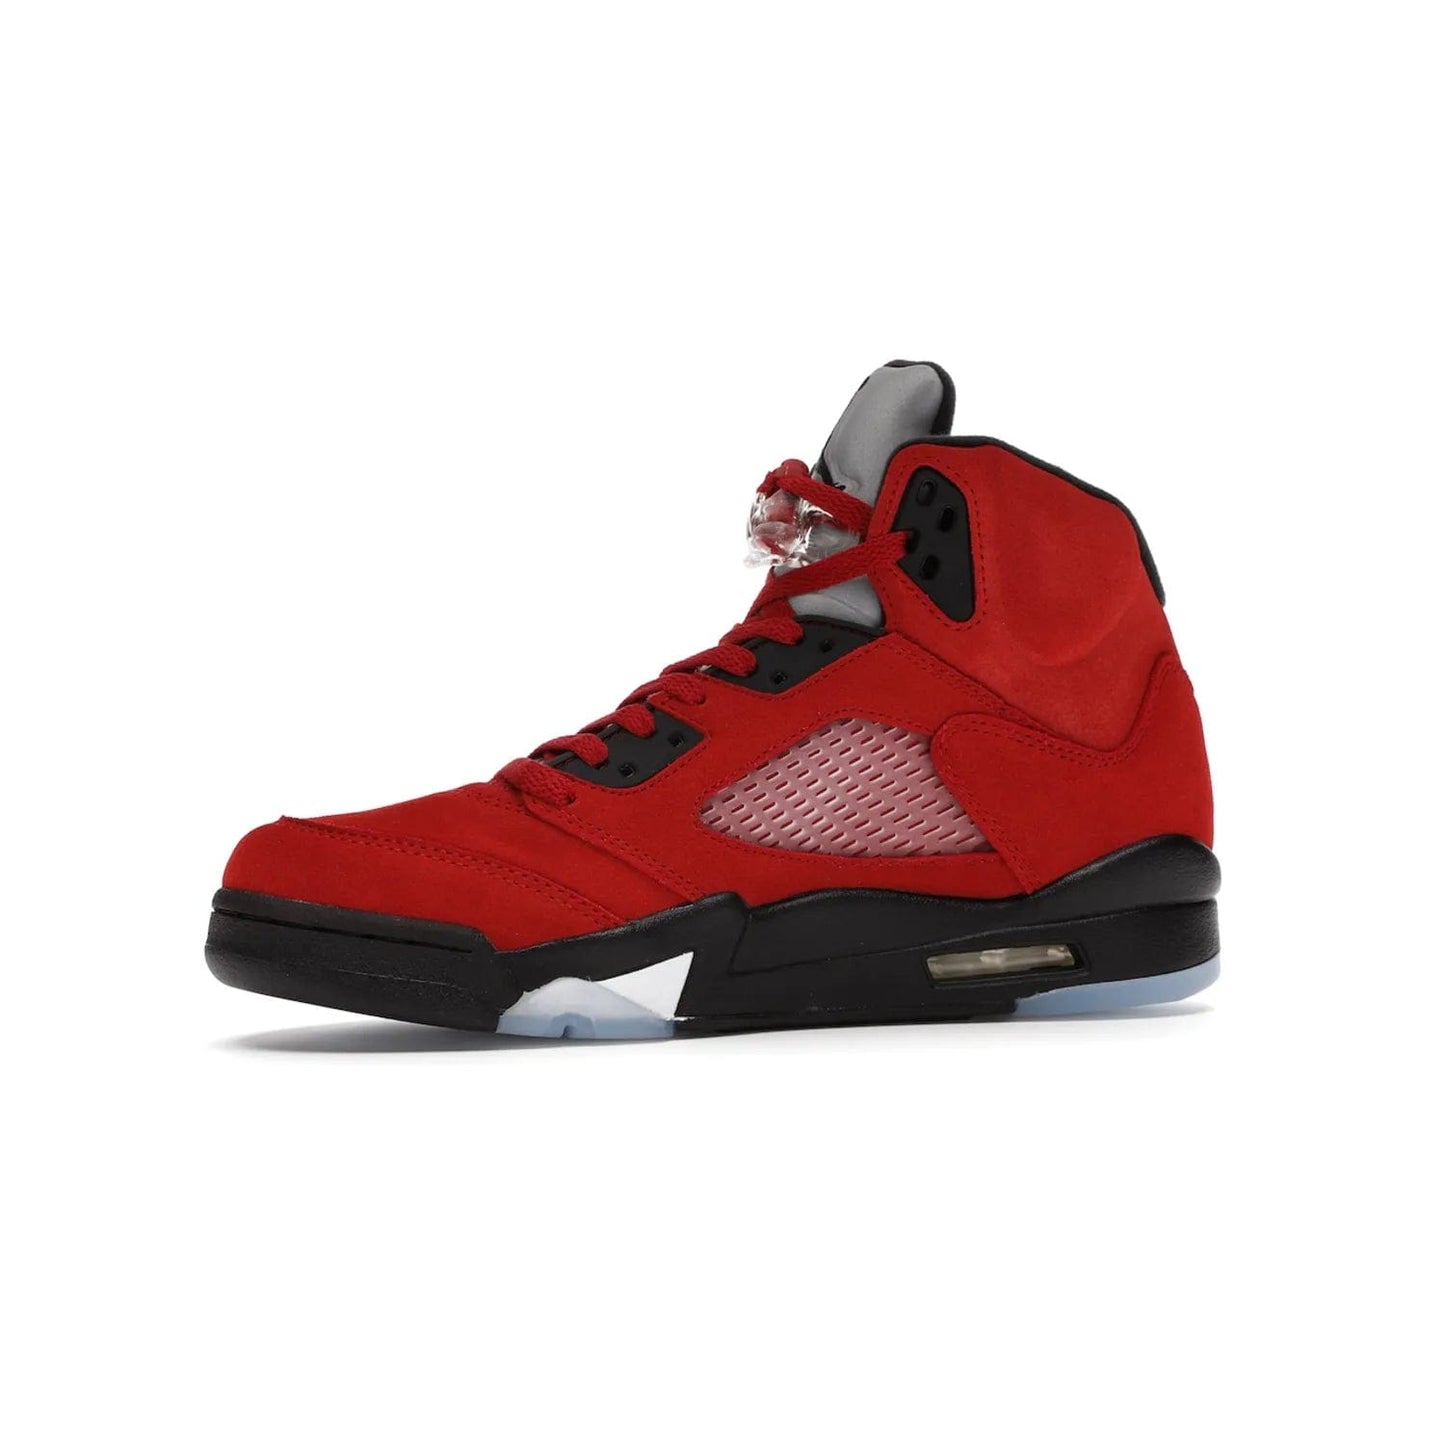 Jordan 5 Retro Raging Bull Red (2021) - Image 17 - Only at www.BallersClubKickz.com - Get ready for the 2021 stand-alone release of the Air Jordan 5 Raging Bulls! This all-suede upper combines luxe details like a Jumpman logo, red & black "23" embroidery and shark tooth detailing, atop a black midsole. Don't miss out - release date in April 2021 for $190.